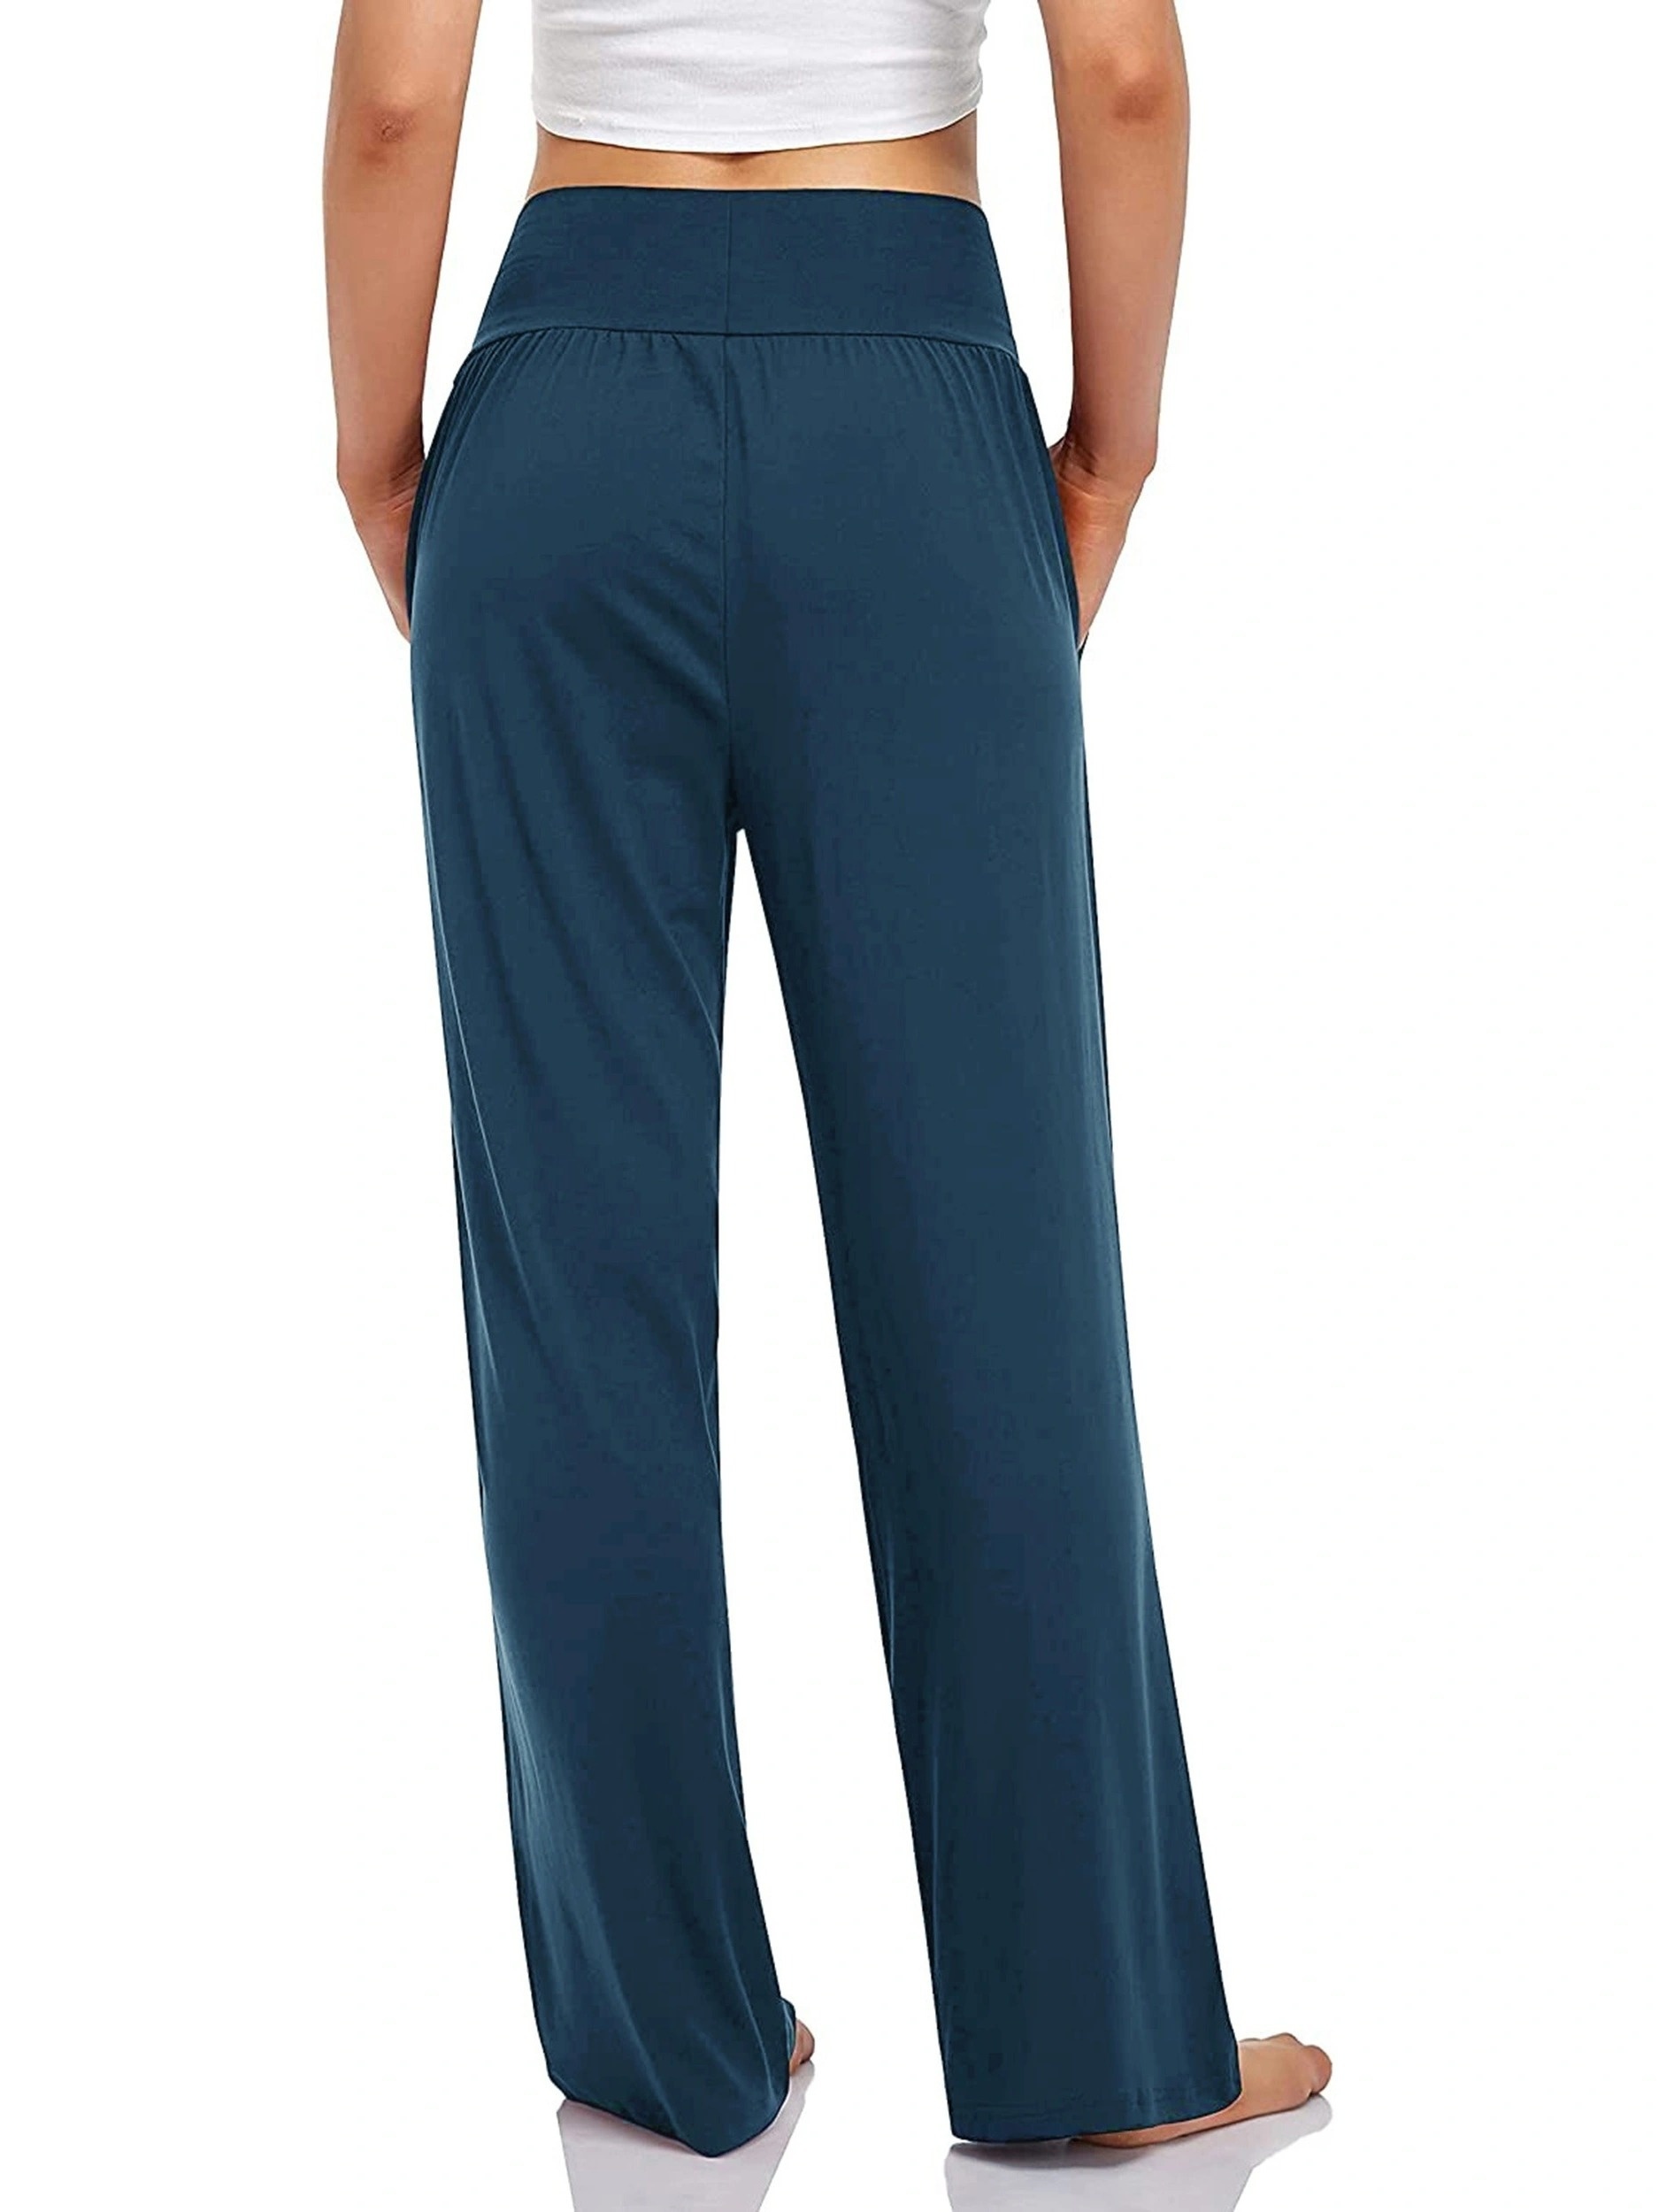 Athletic Pants for Women Clearance Under $10 Plus Size Drawstring with  Button Pockets Wide Leg Running Cropped Pants High Waist Blue Womens Pants  XS 